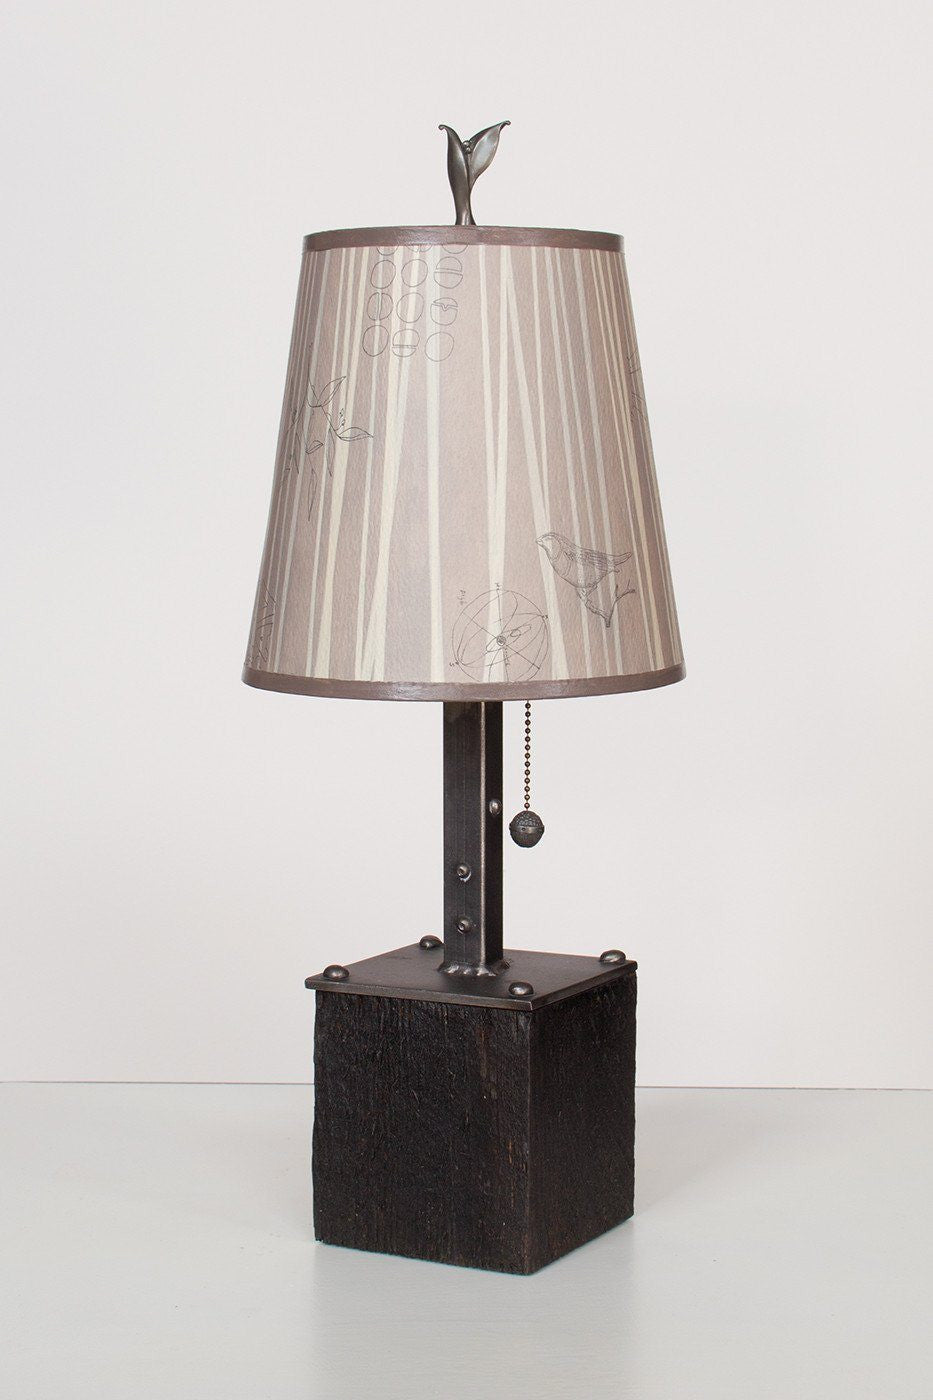 Steel Table Lamp on Reclaimed Wood with Small Drum Shade in Birch